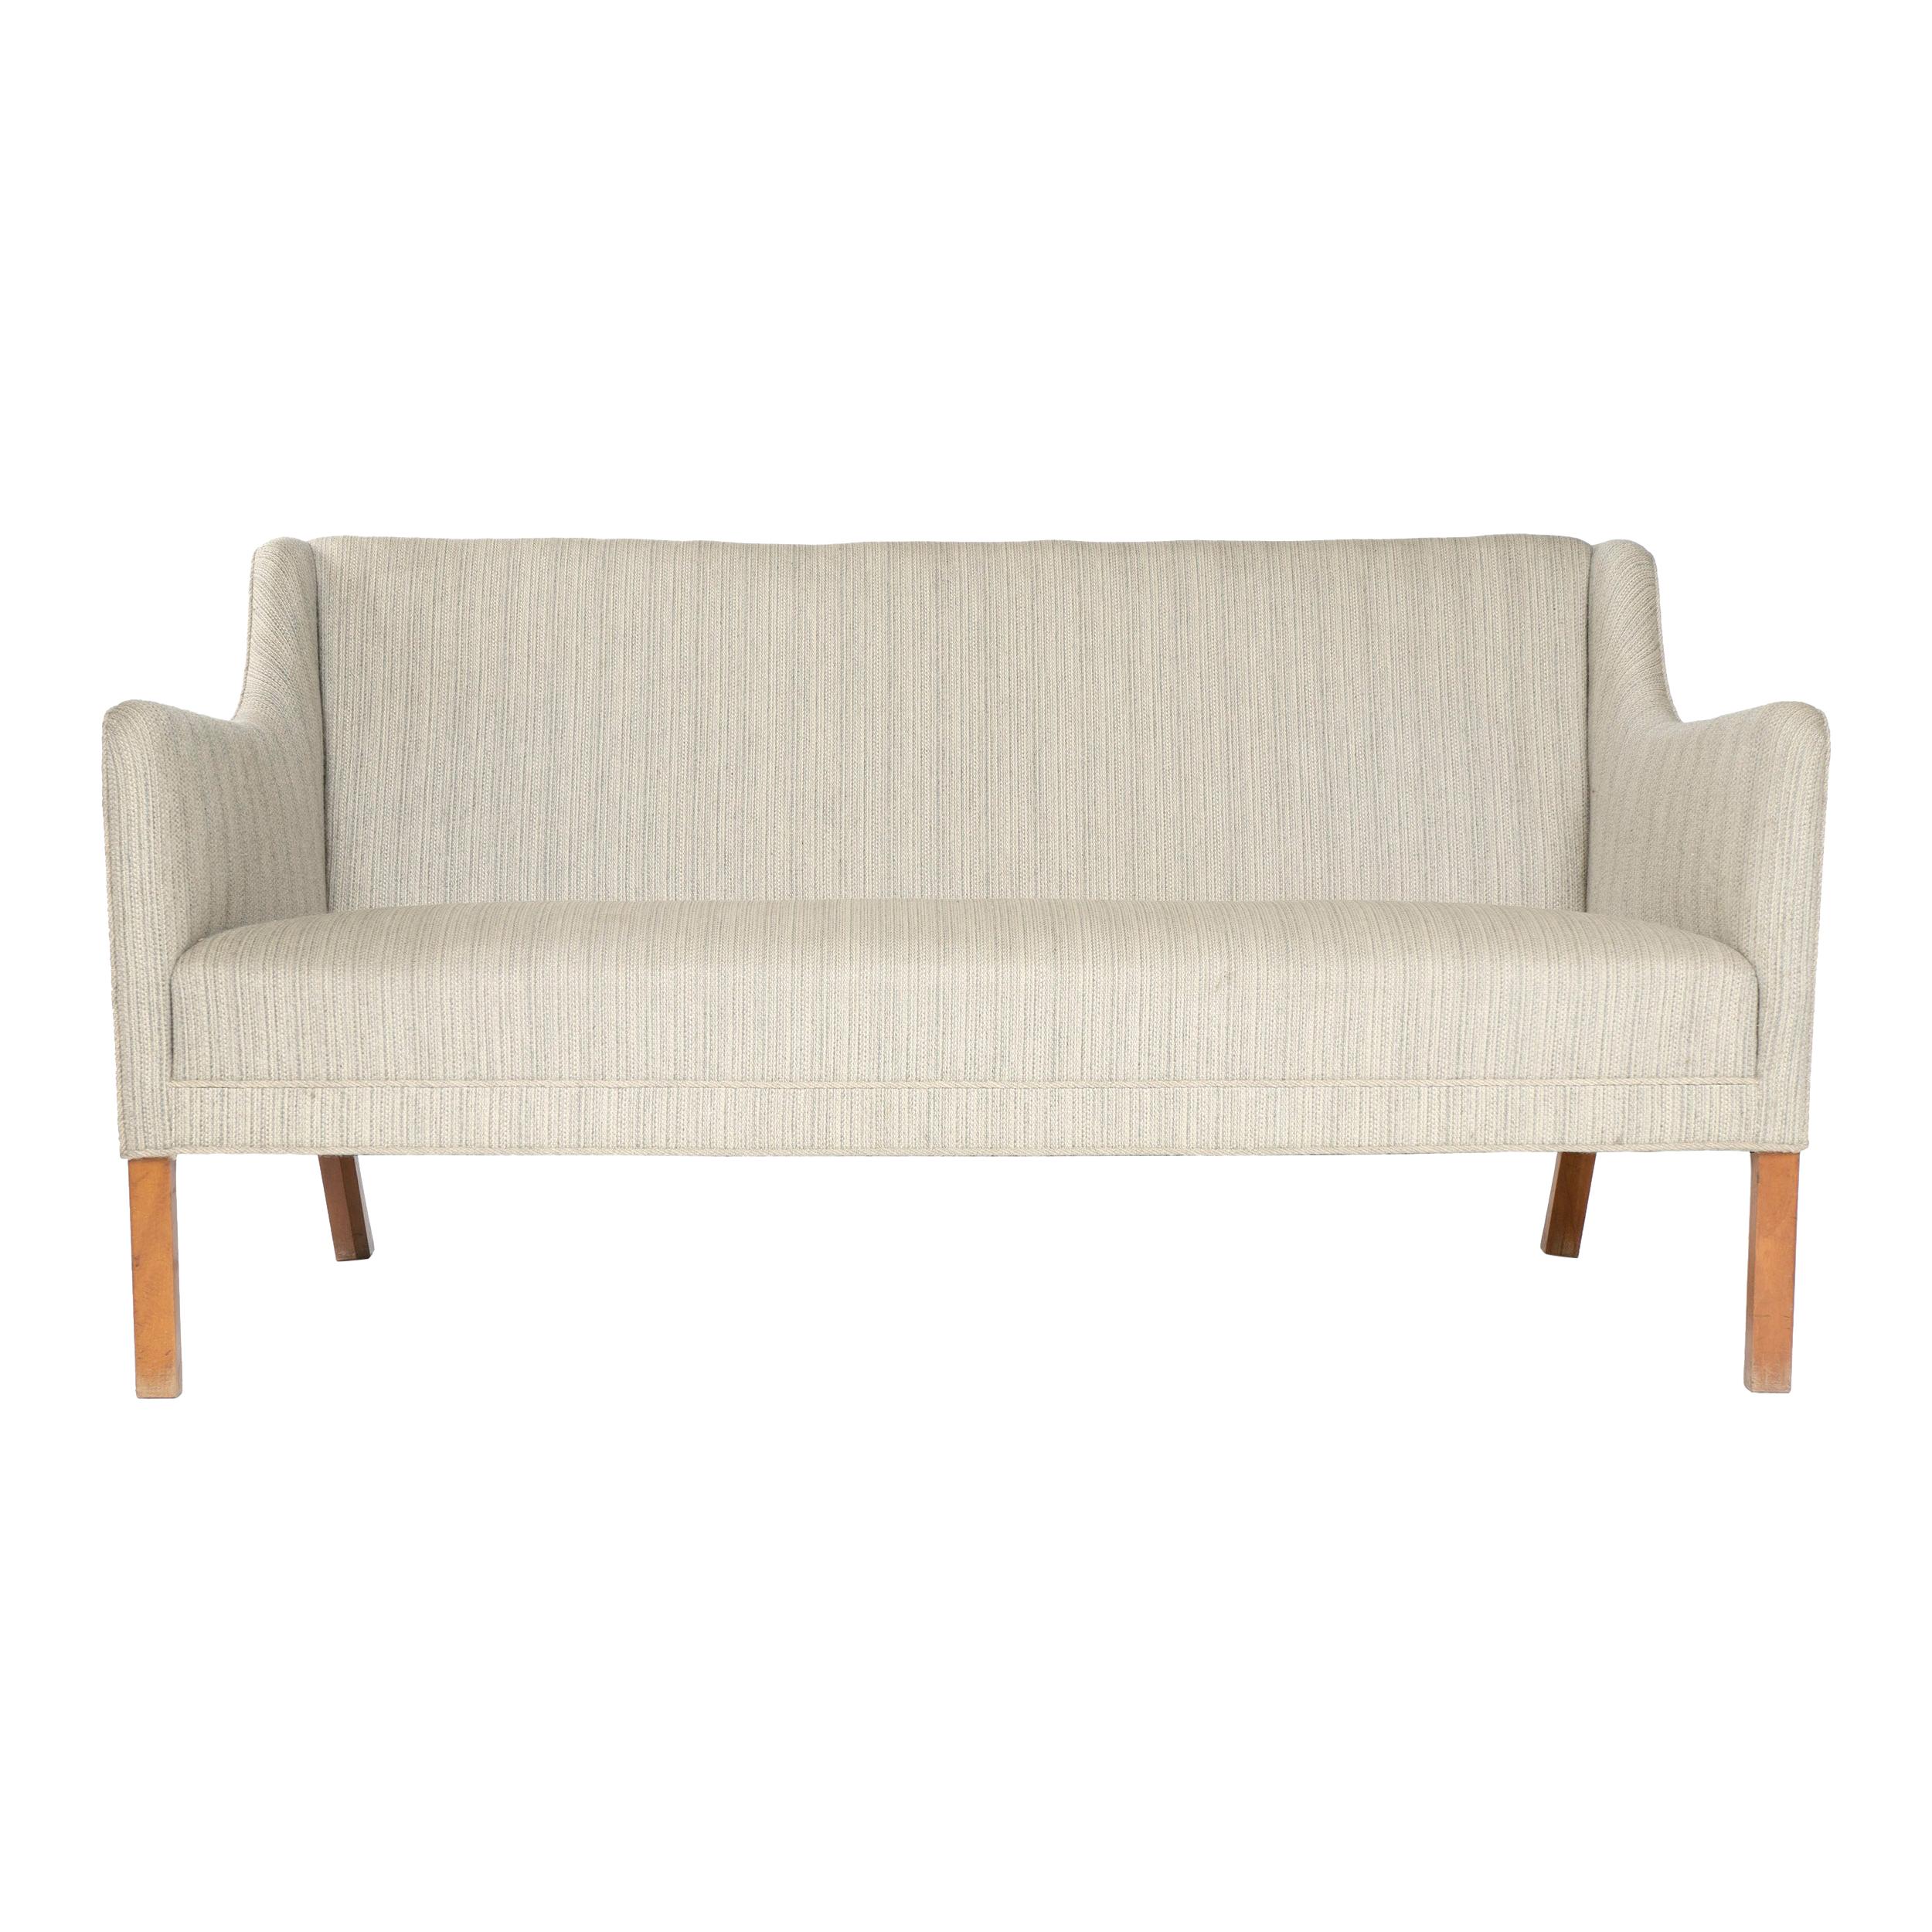 1940s Danish Upholstered Settee by Ole Wanscher for A.J. Iversen